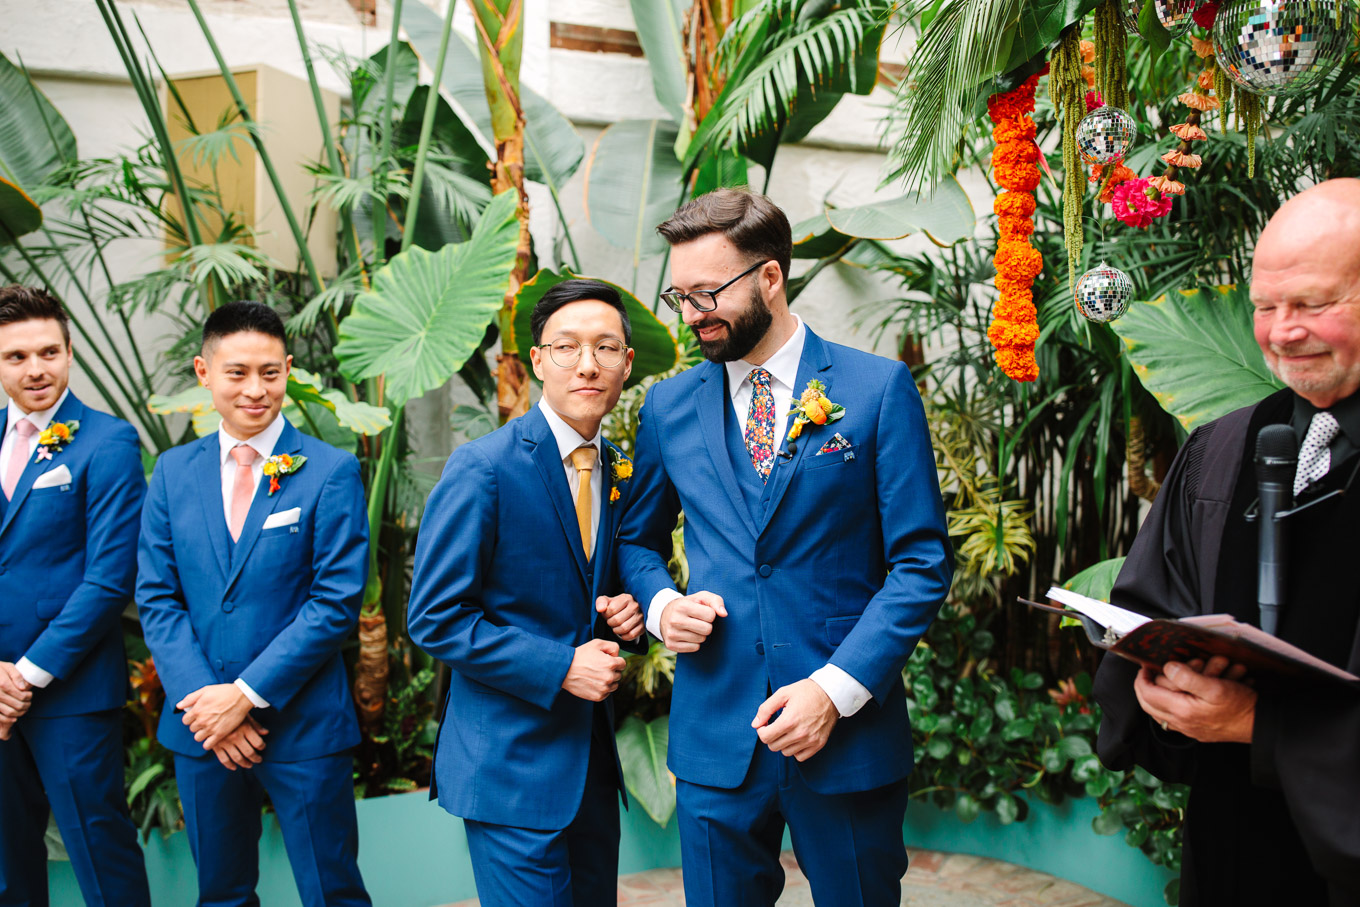 Groom arriving at ceremony | Colorful Downtown Los Angeles Valentine Wedding | Los Angeles wedding photographer | #losangeleswedding #colorfulwedding #DTLA #valentinedtla   Source: Mary Costa Photography | Los Angeles